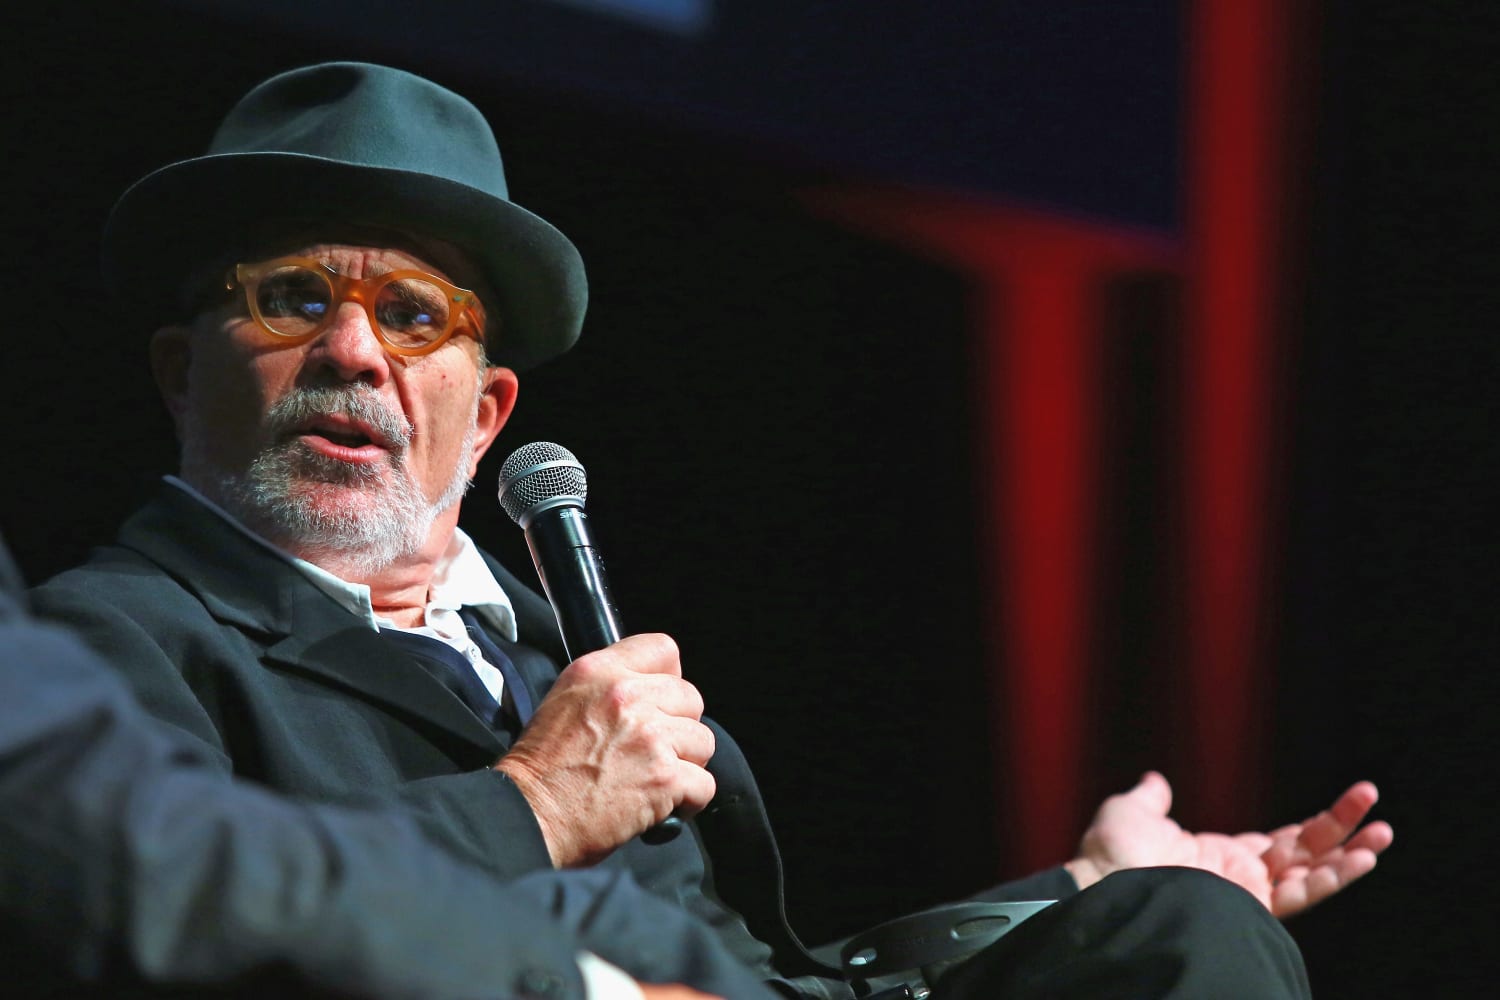 Playwright David Mamet claims on Fox News that teachers 'are inclined'  toward pedophilia